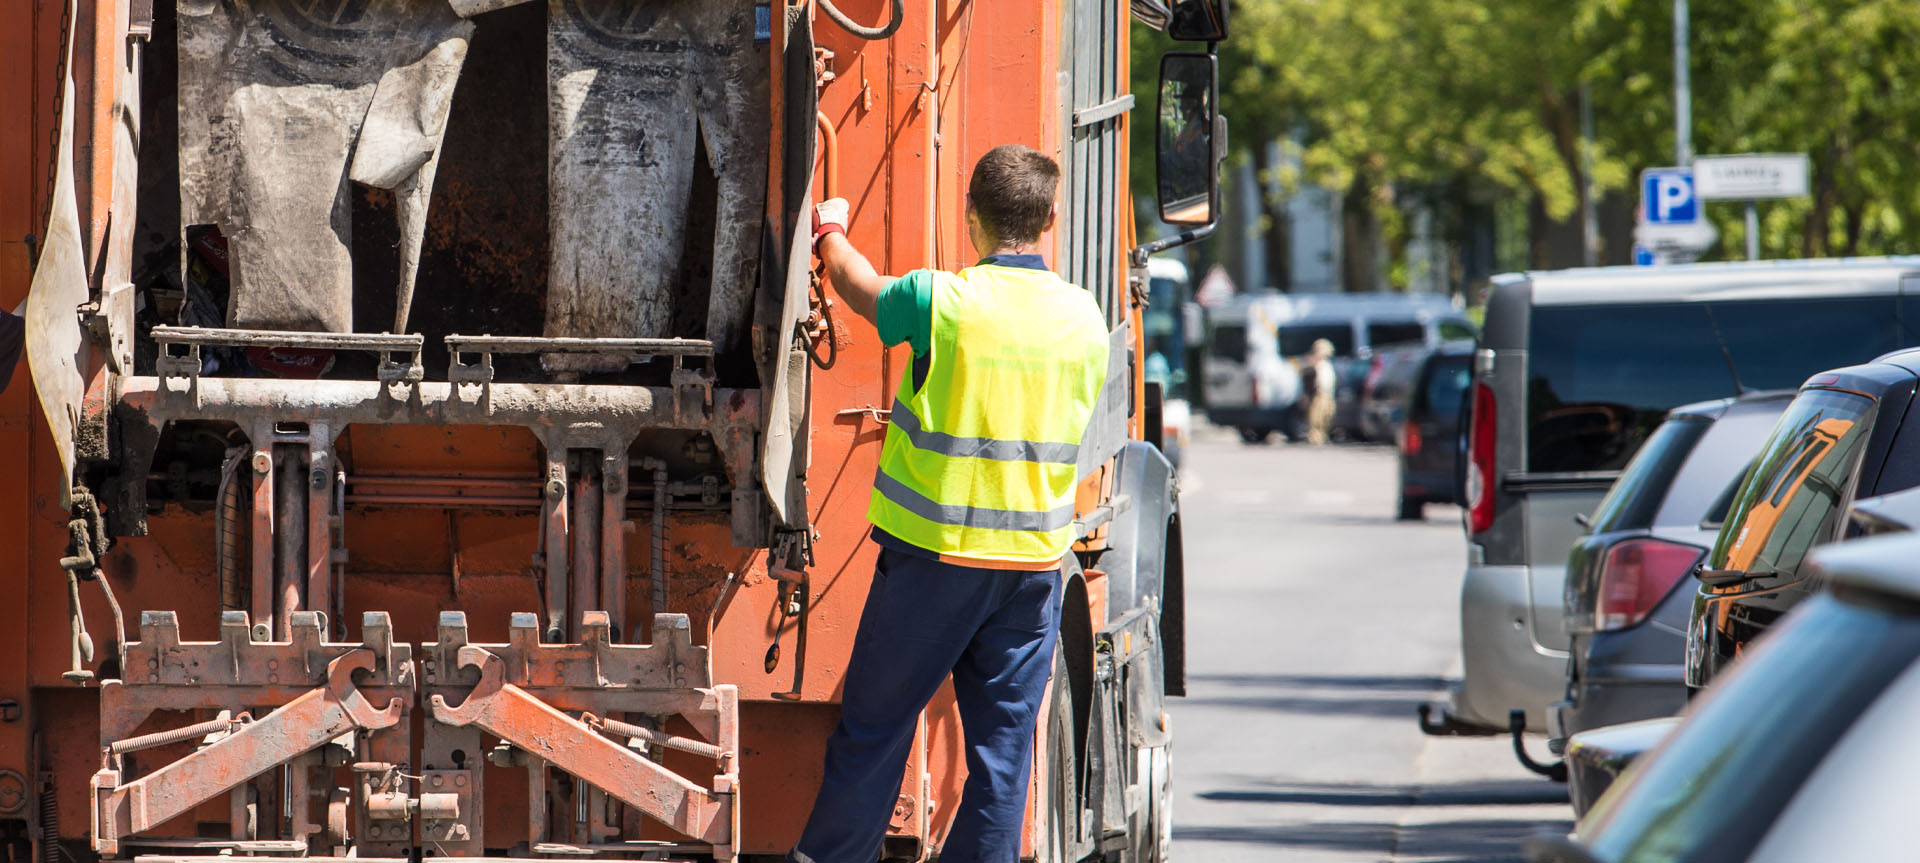 Image showing a binman hanging on the back of a bin lorry